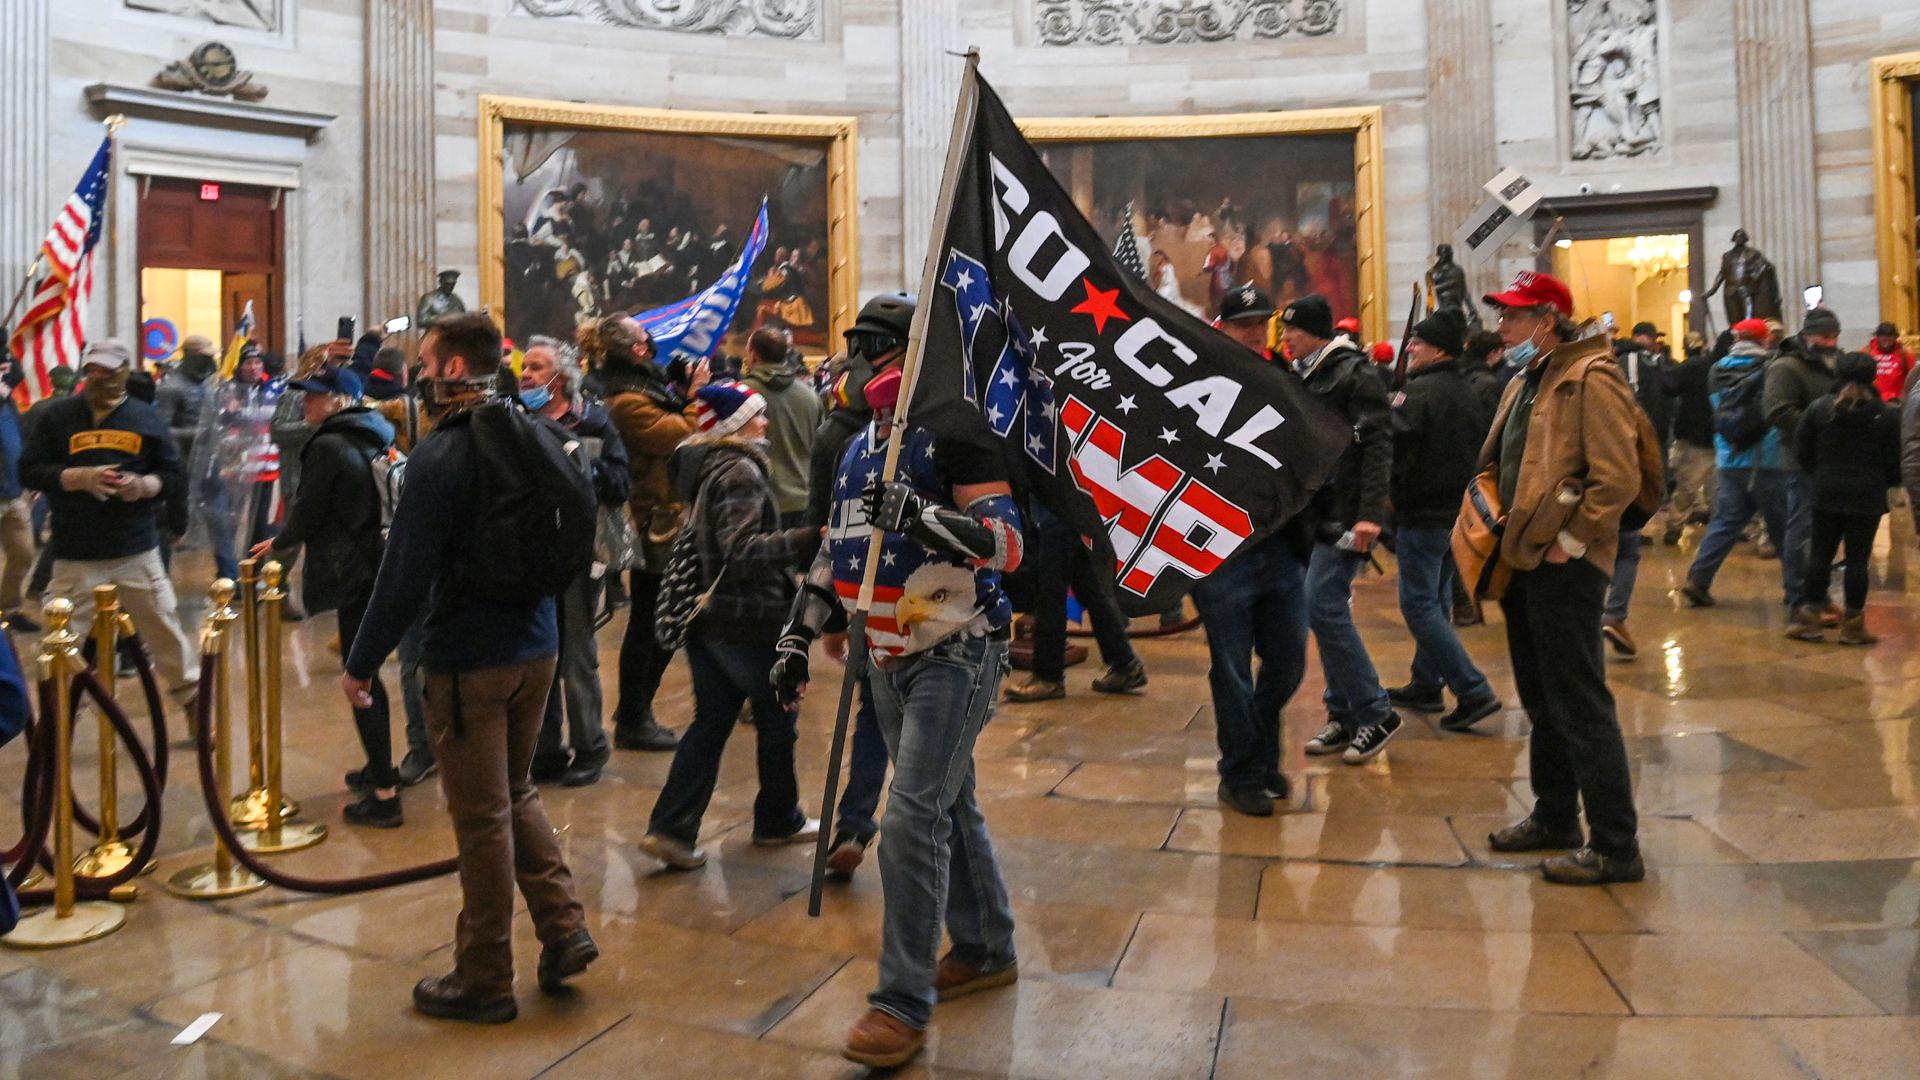  Supporters of US President Donald Trump roam under the Capitol Rotunda after invading the Capitol building on January 6, 2021, in Washington, DC.